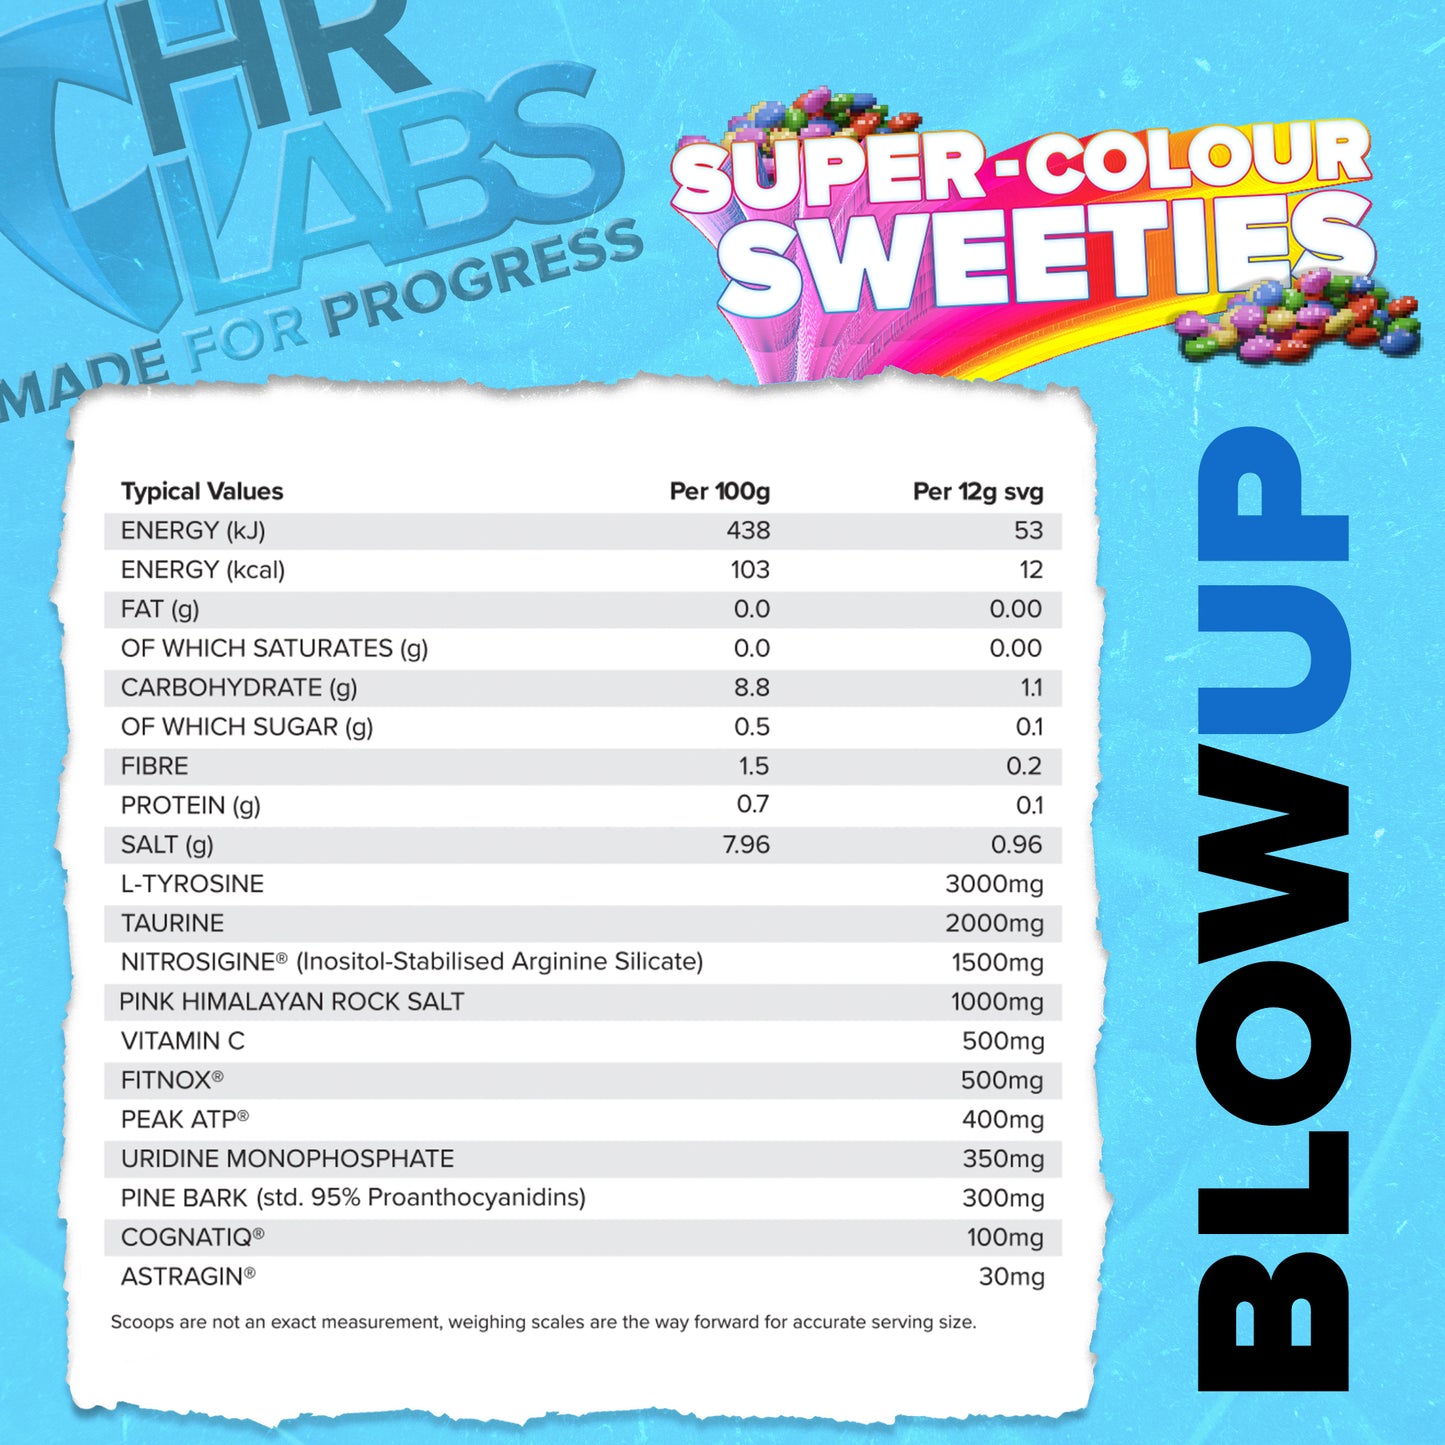 BLOW UP SUPER COLOUR SWEETIES